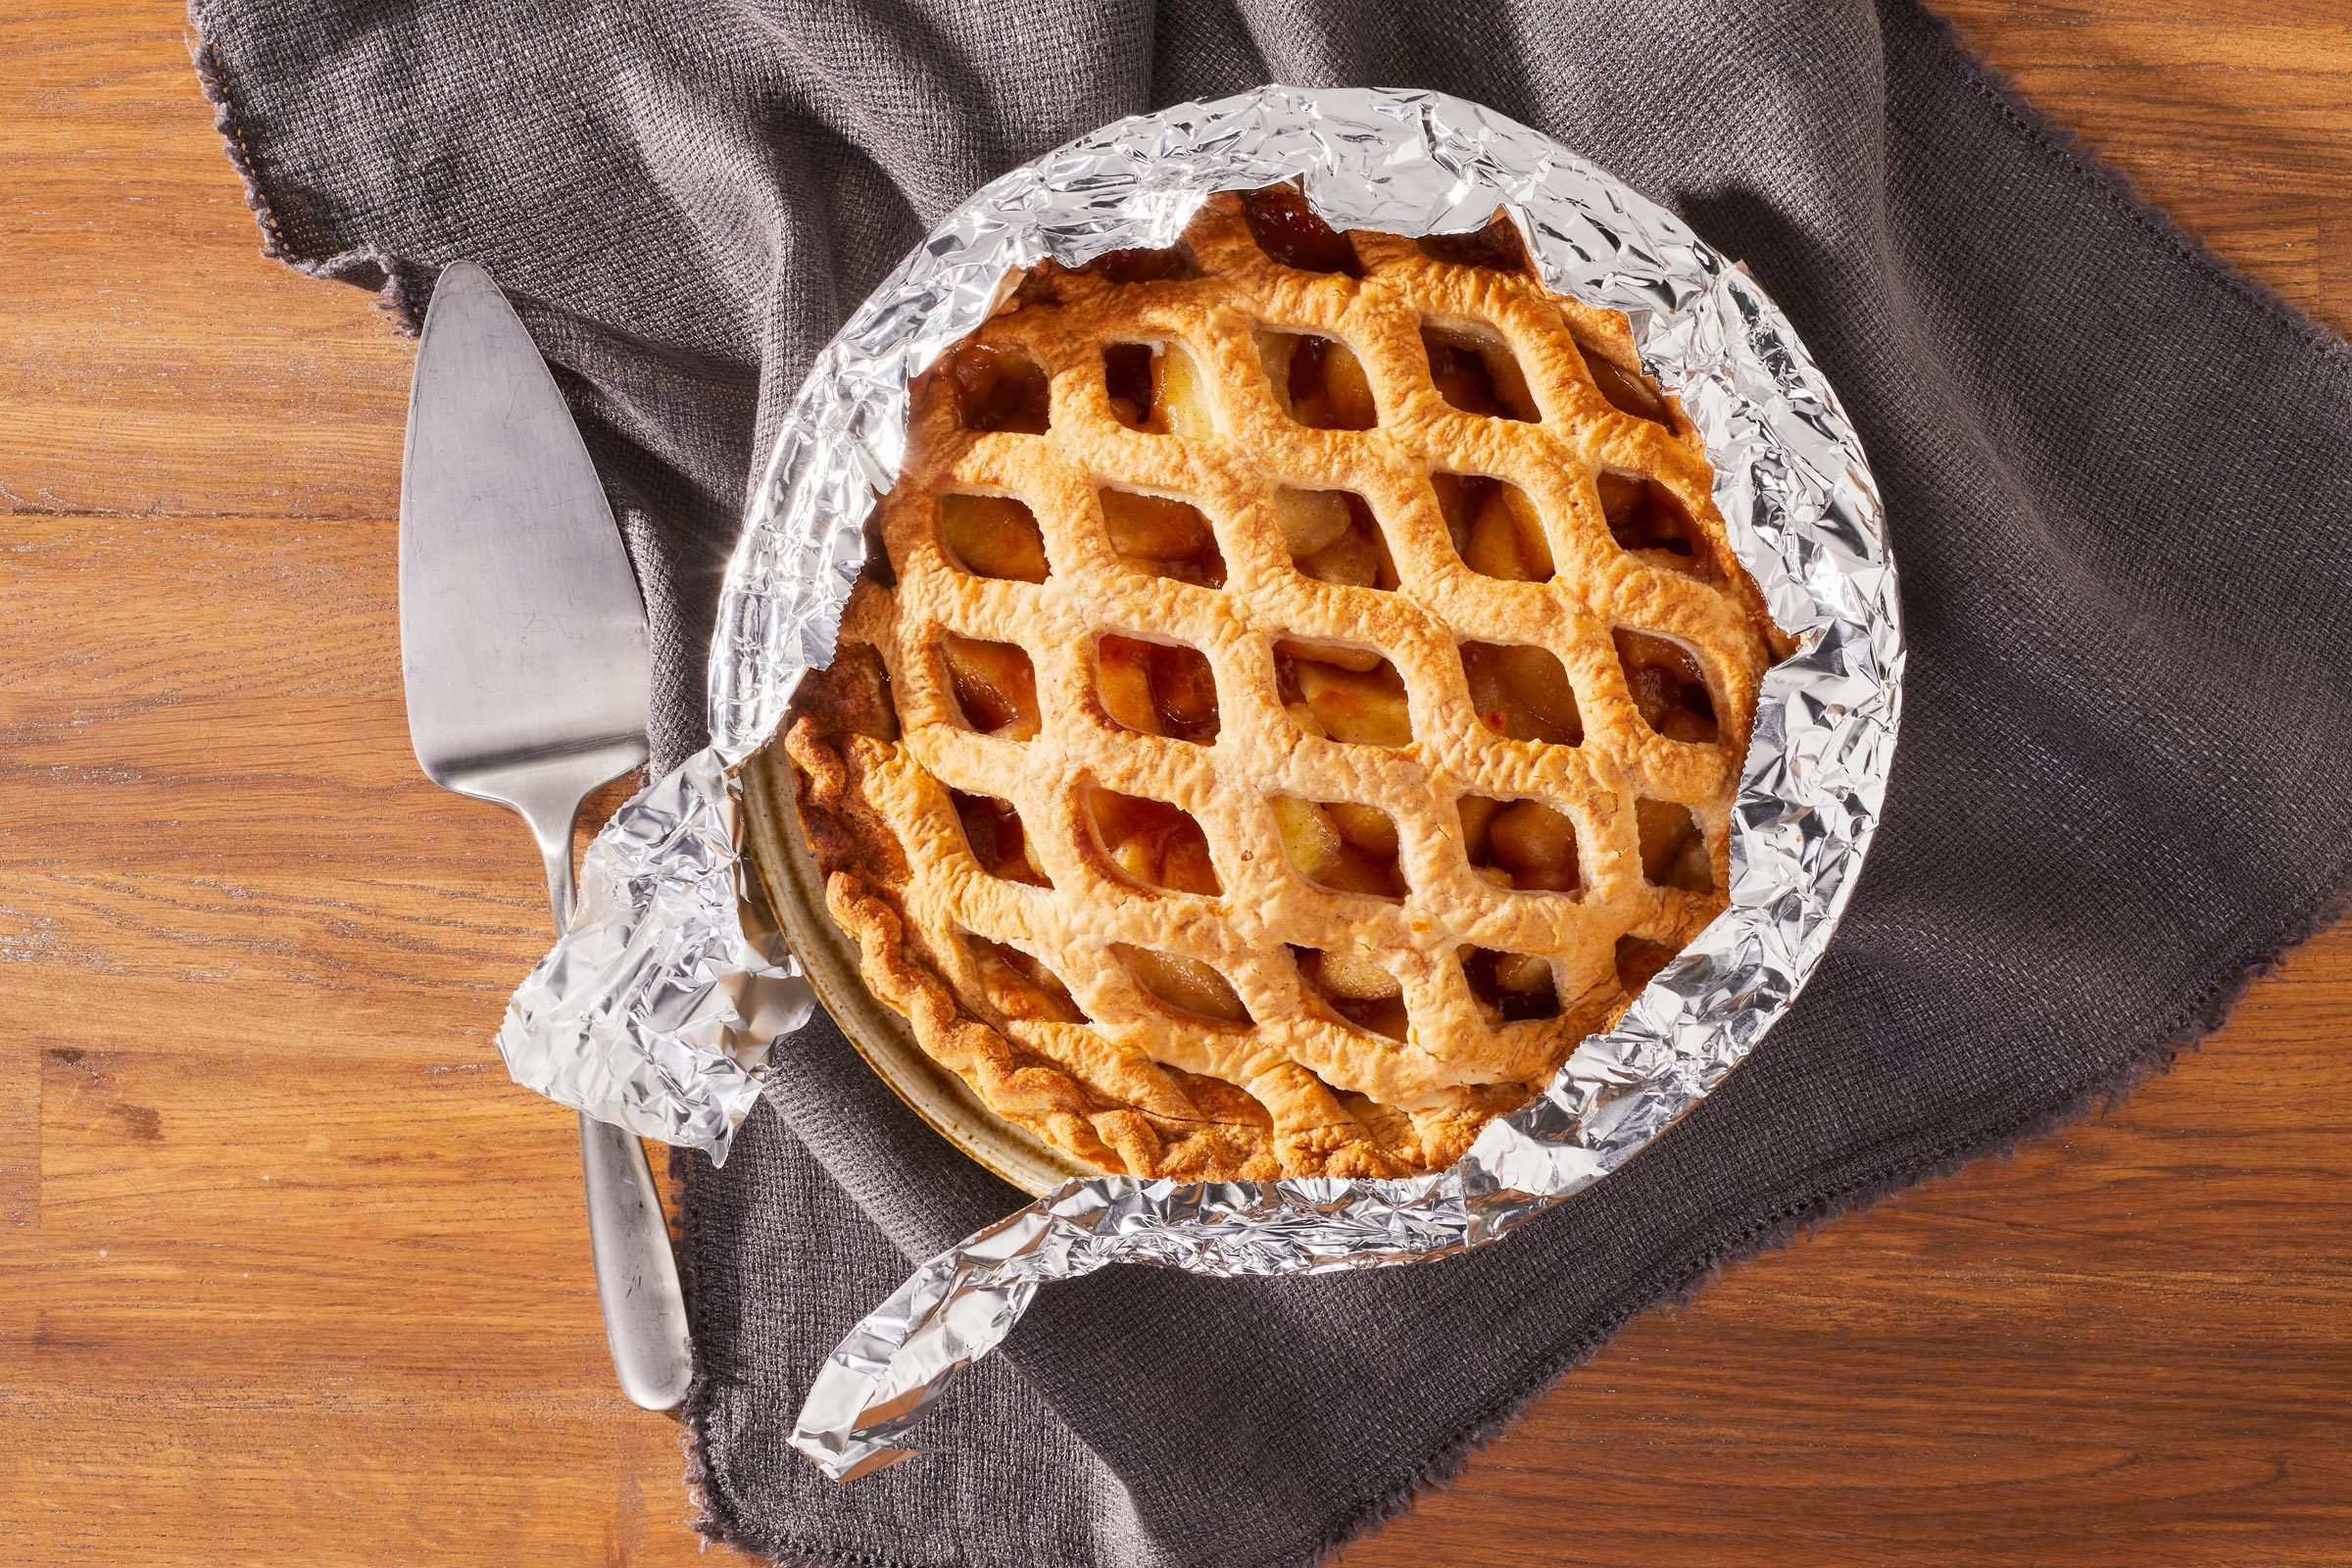 Pie wrapped in foil